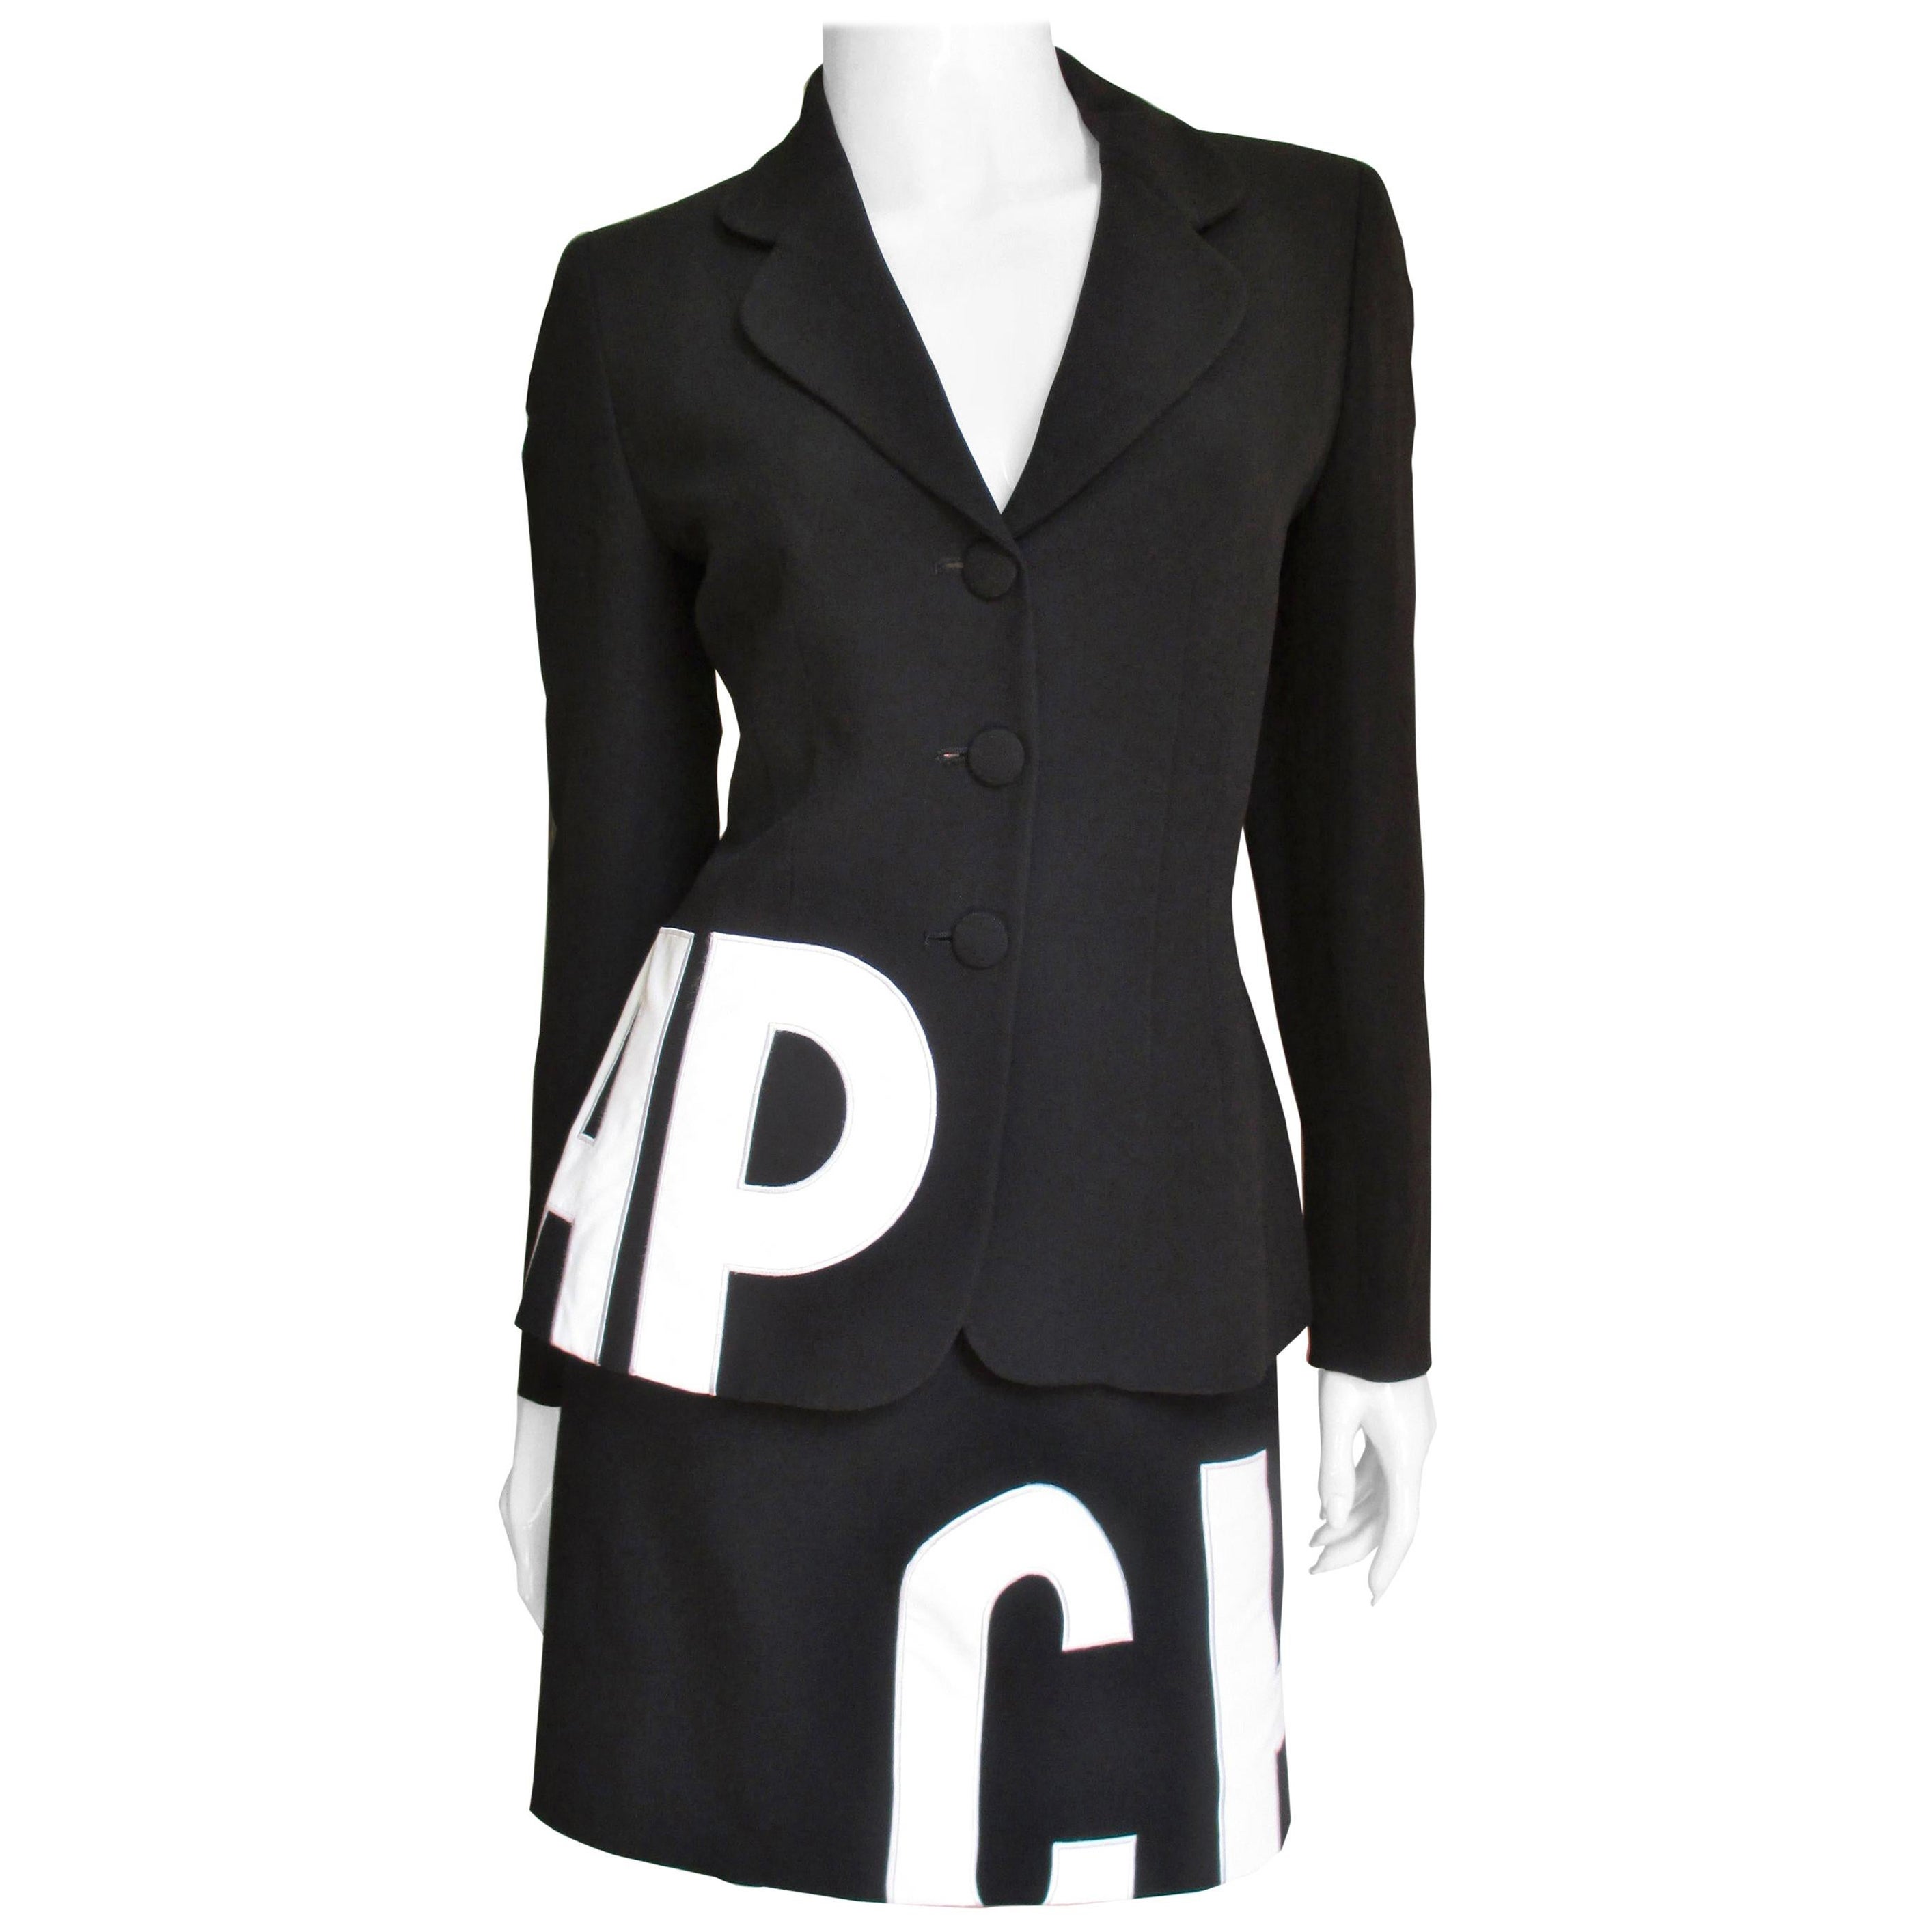  Moschino Letter Applique Skirt Suit For Sale